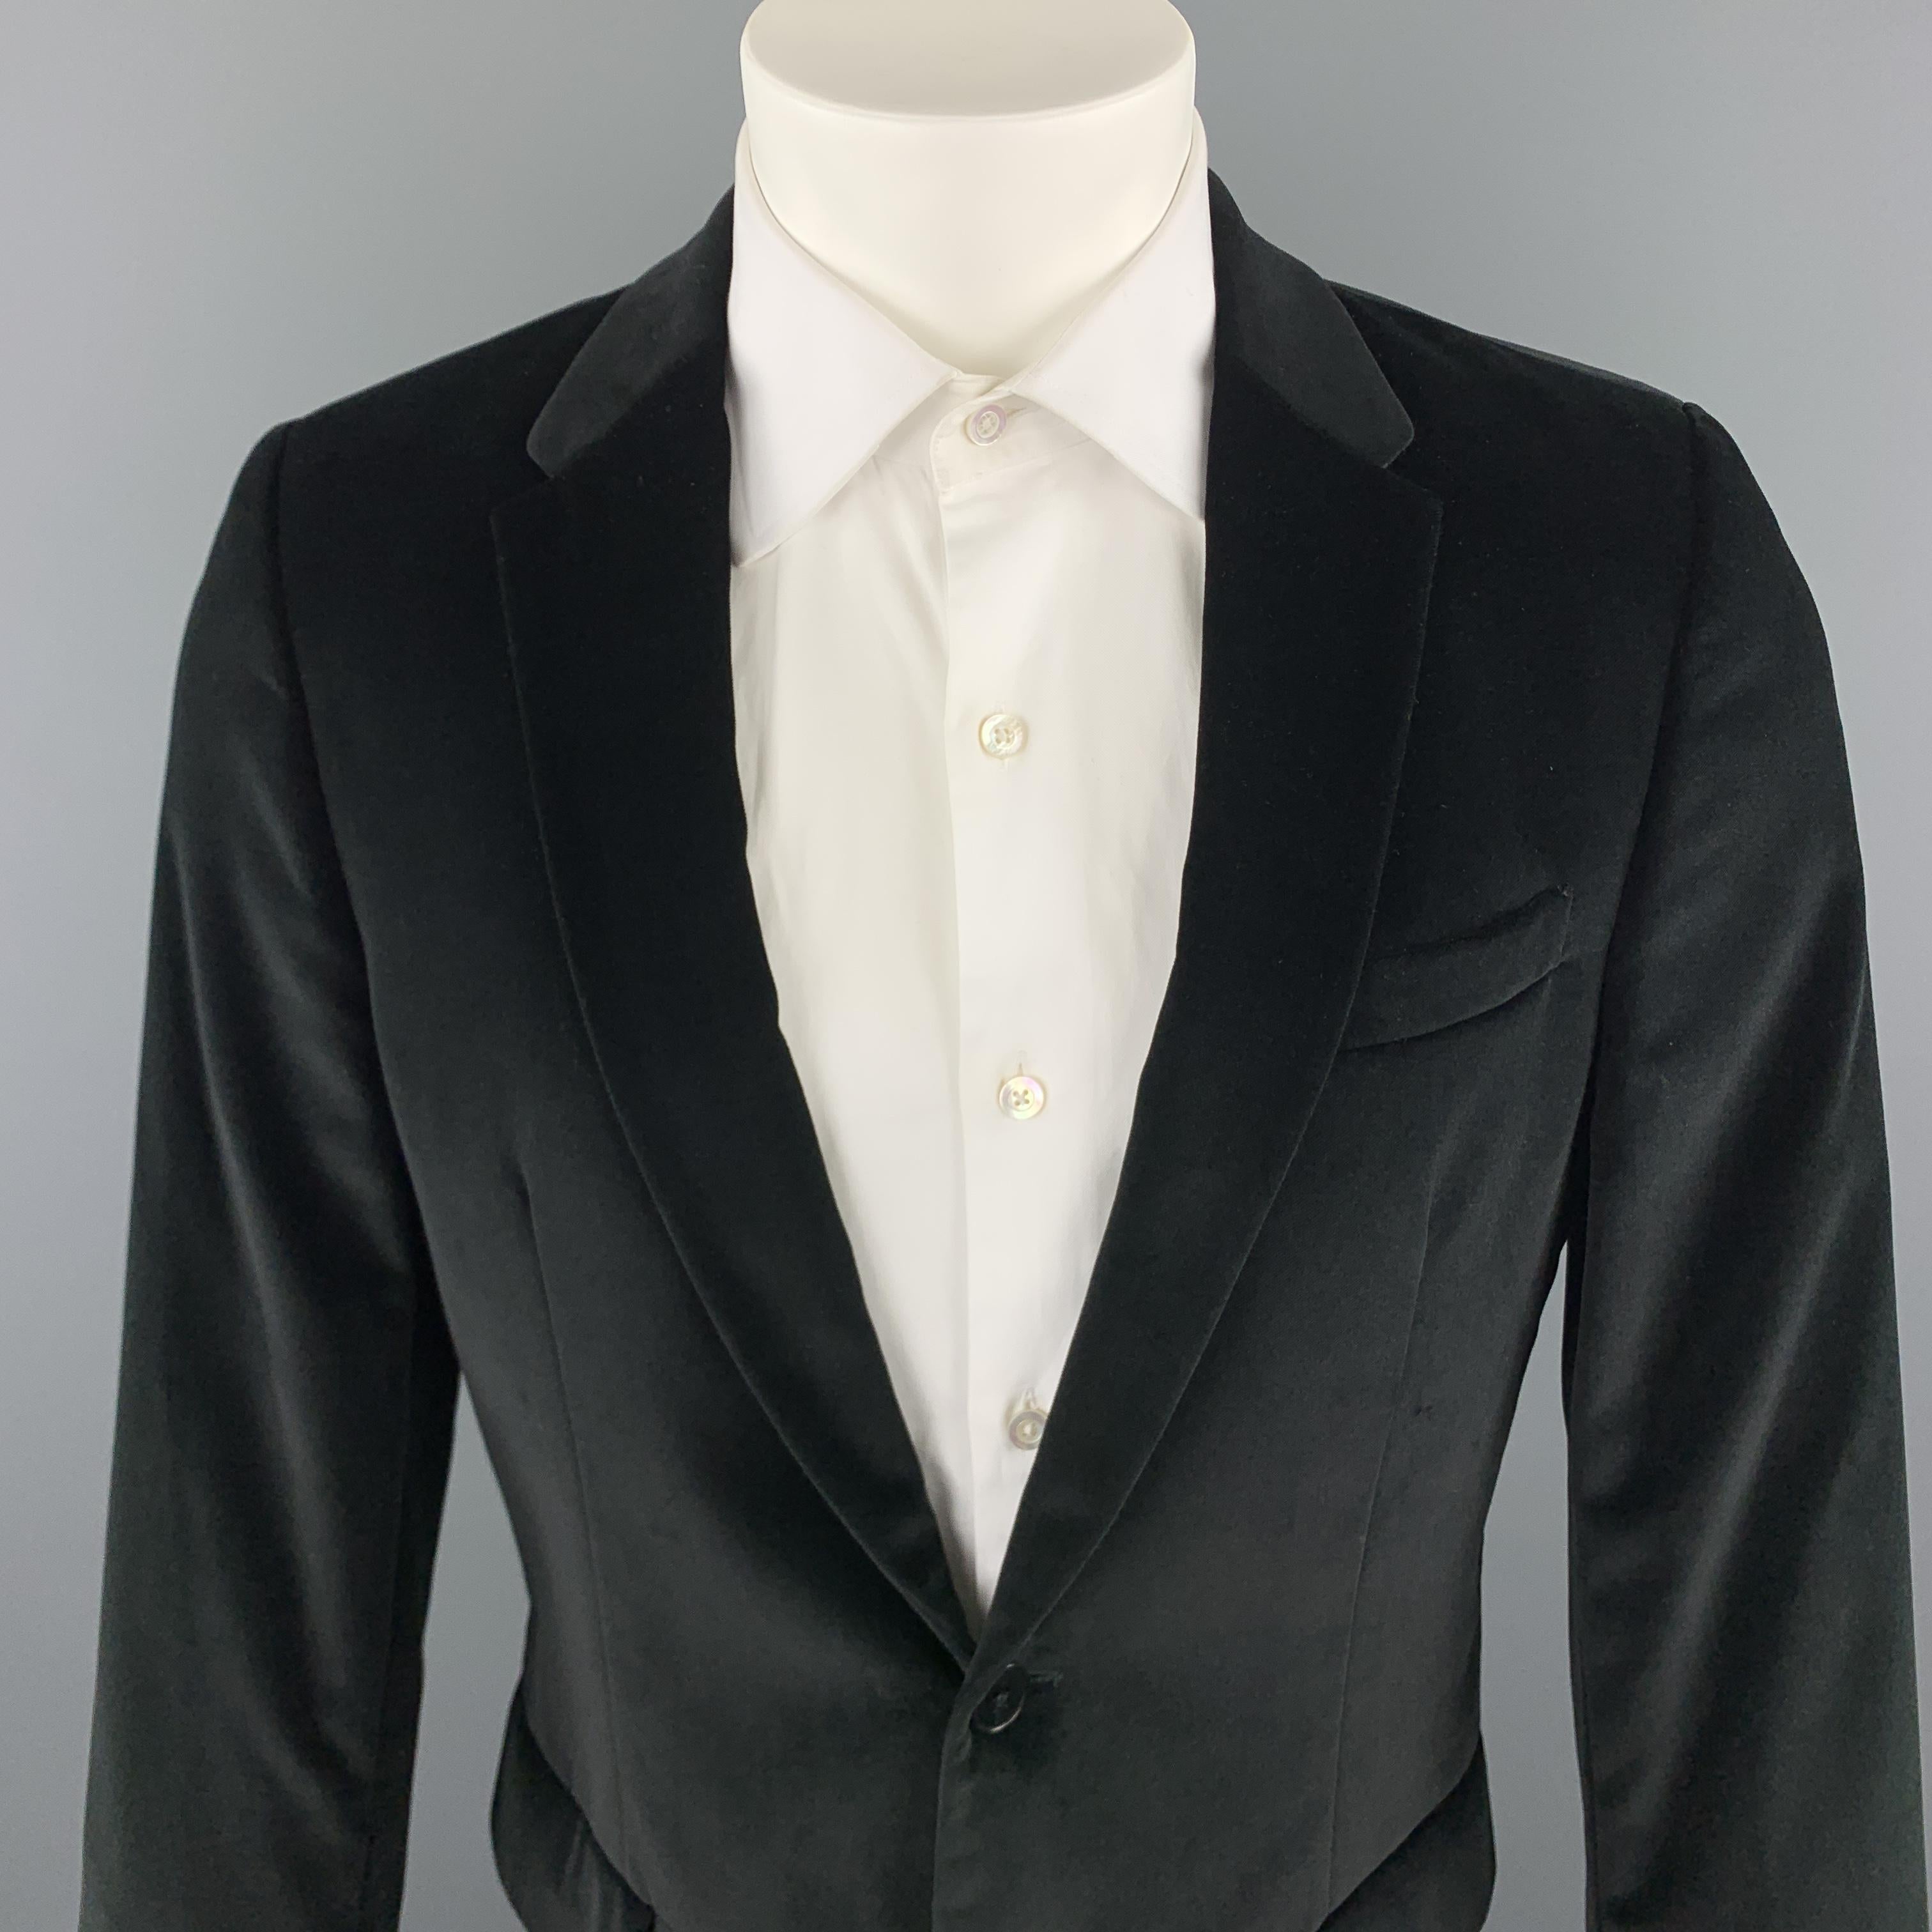 PS by PAUL SMITH sport coat comes in a solid black velvet material, featuring a notch lapel, two buttons at closure, buttoned  cuffs, and a double vent at back. Made in Portugal.

Excellent Pre-Owned Condition.
Marked: